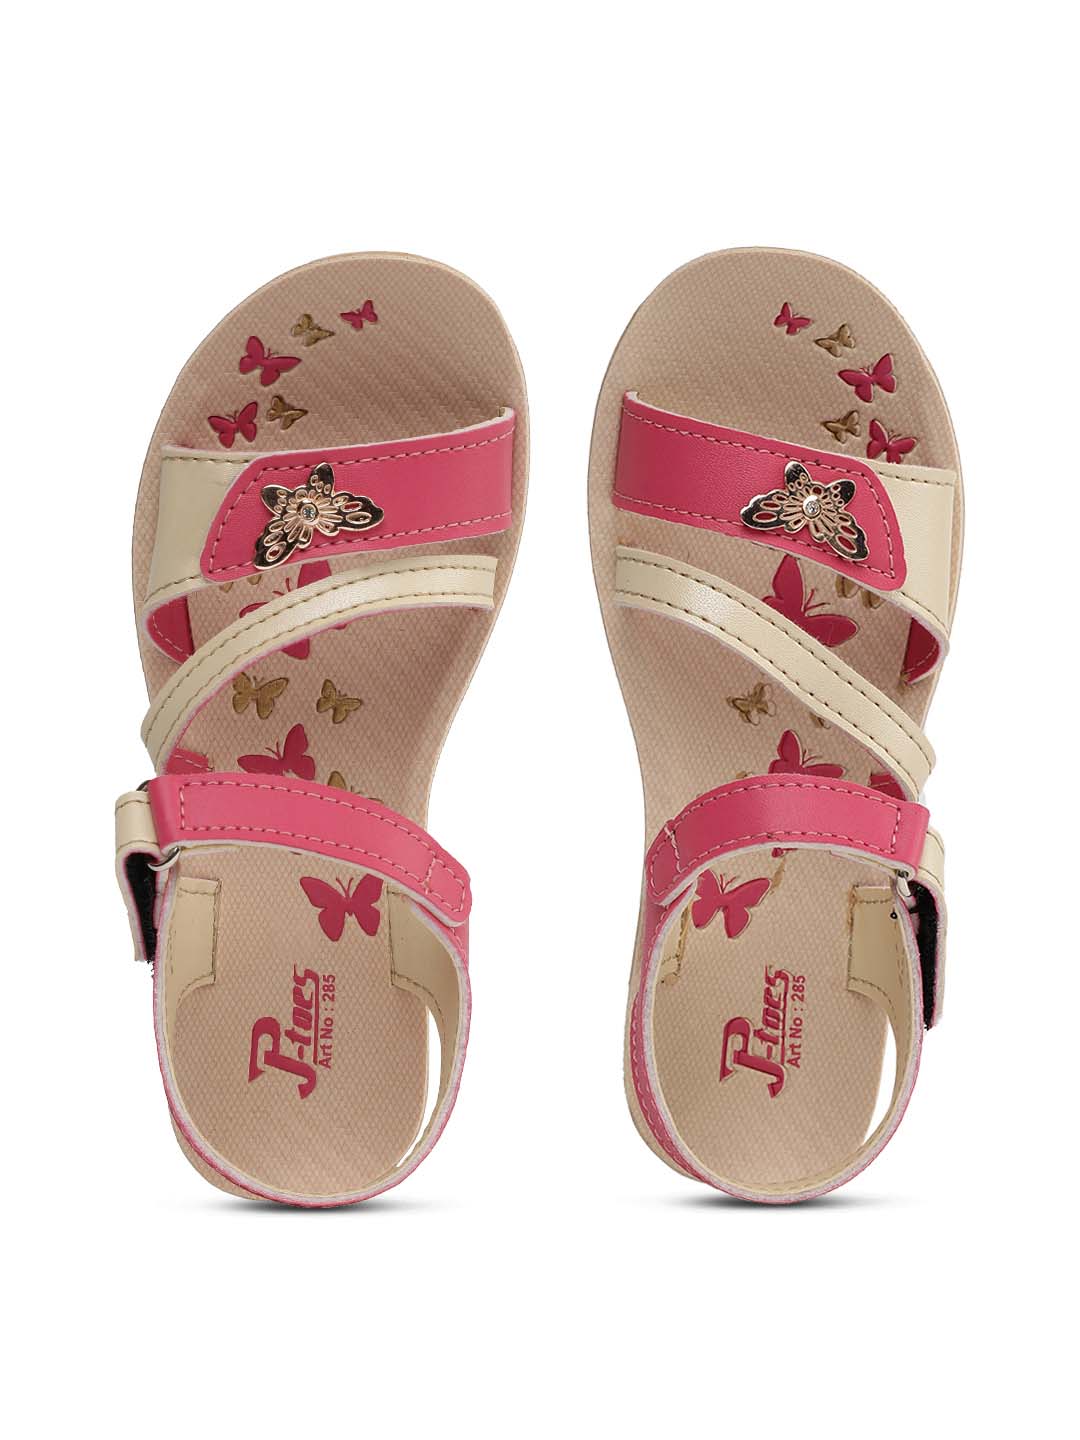 Paragon PU0285C Kids Casual Fashion Sandals | Comfortable Flat Sandals | Trendy Outdoor Indoor Floaters for Boys &amp; Girls